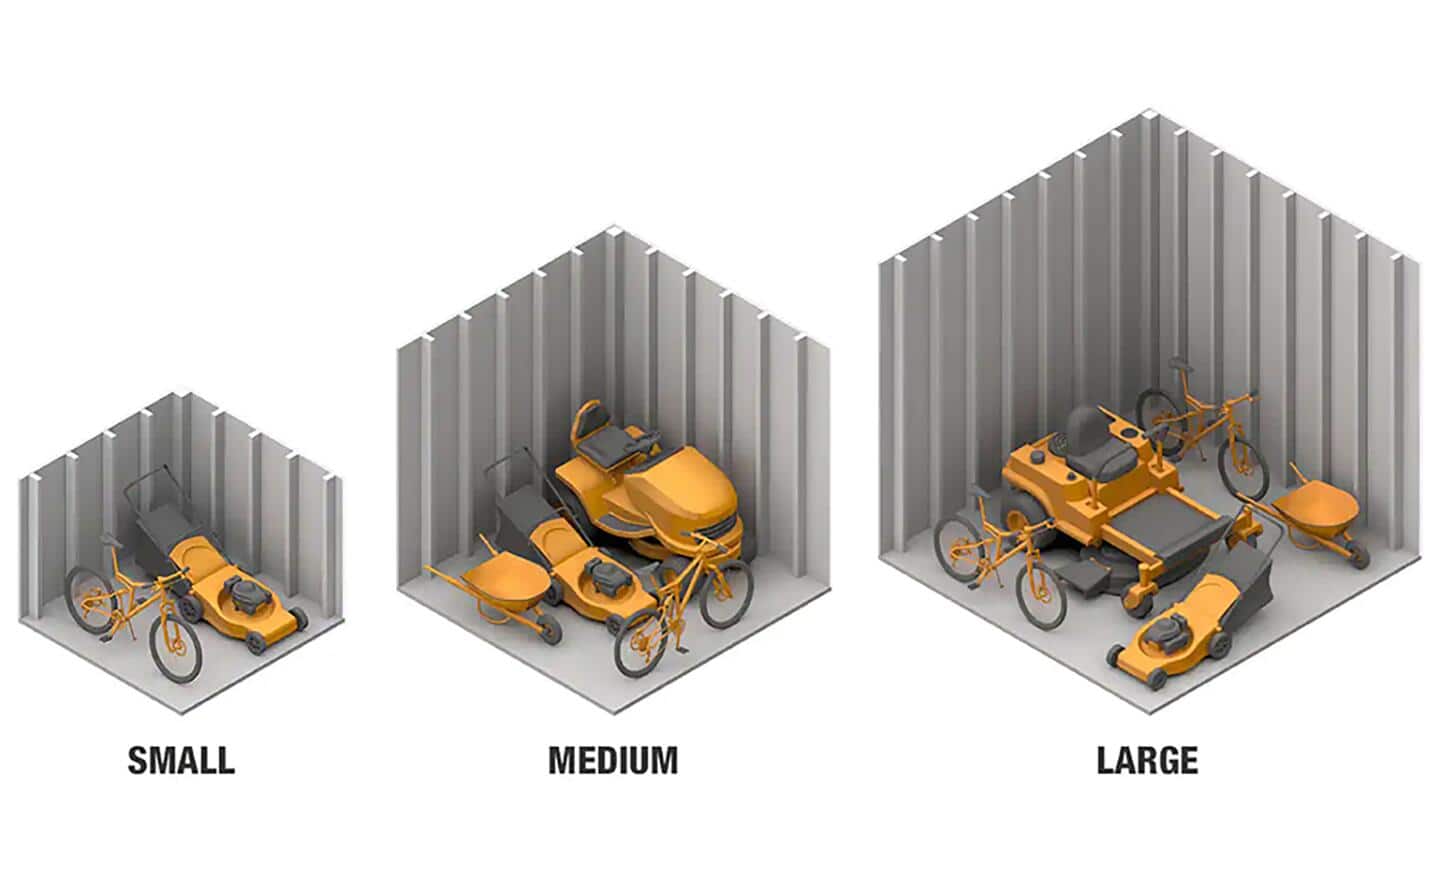 A diagram showing the storage capacity of a small, medium and large outdoor shed.